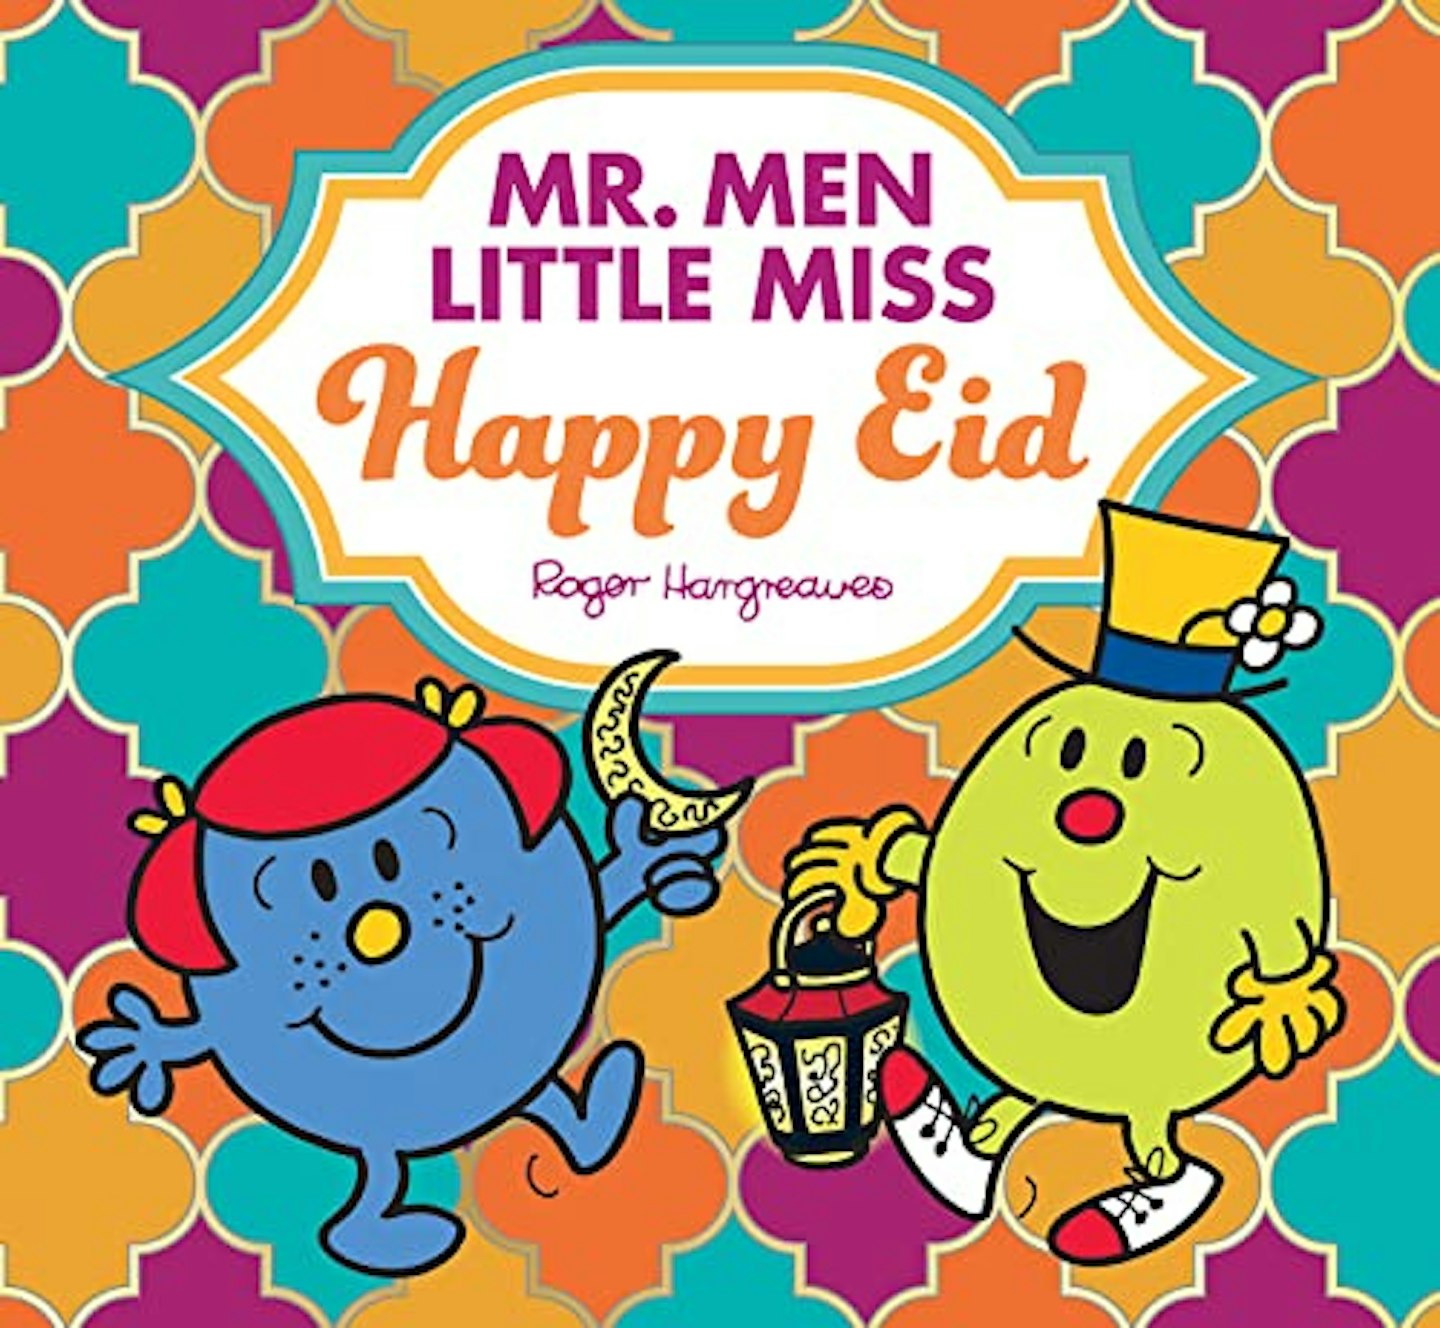 Little Men and Little Miss Happy Eid by Adam Hargreaves